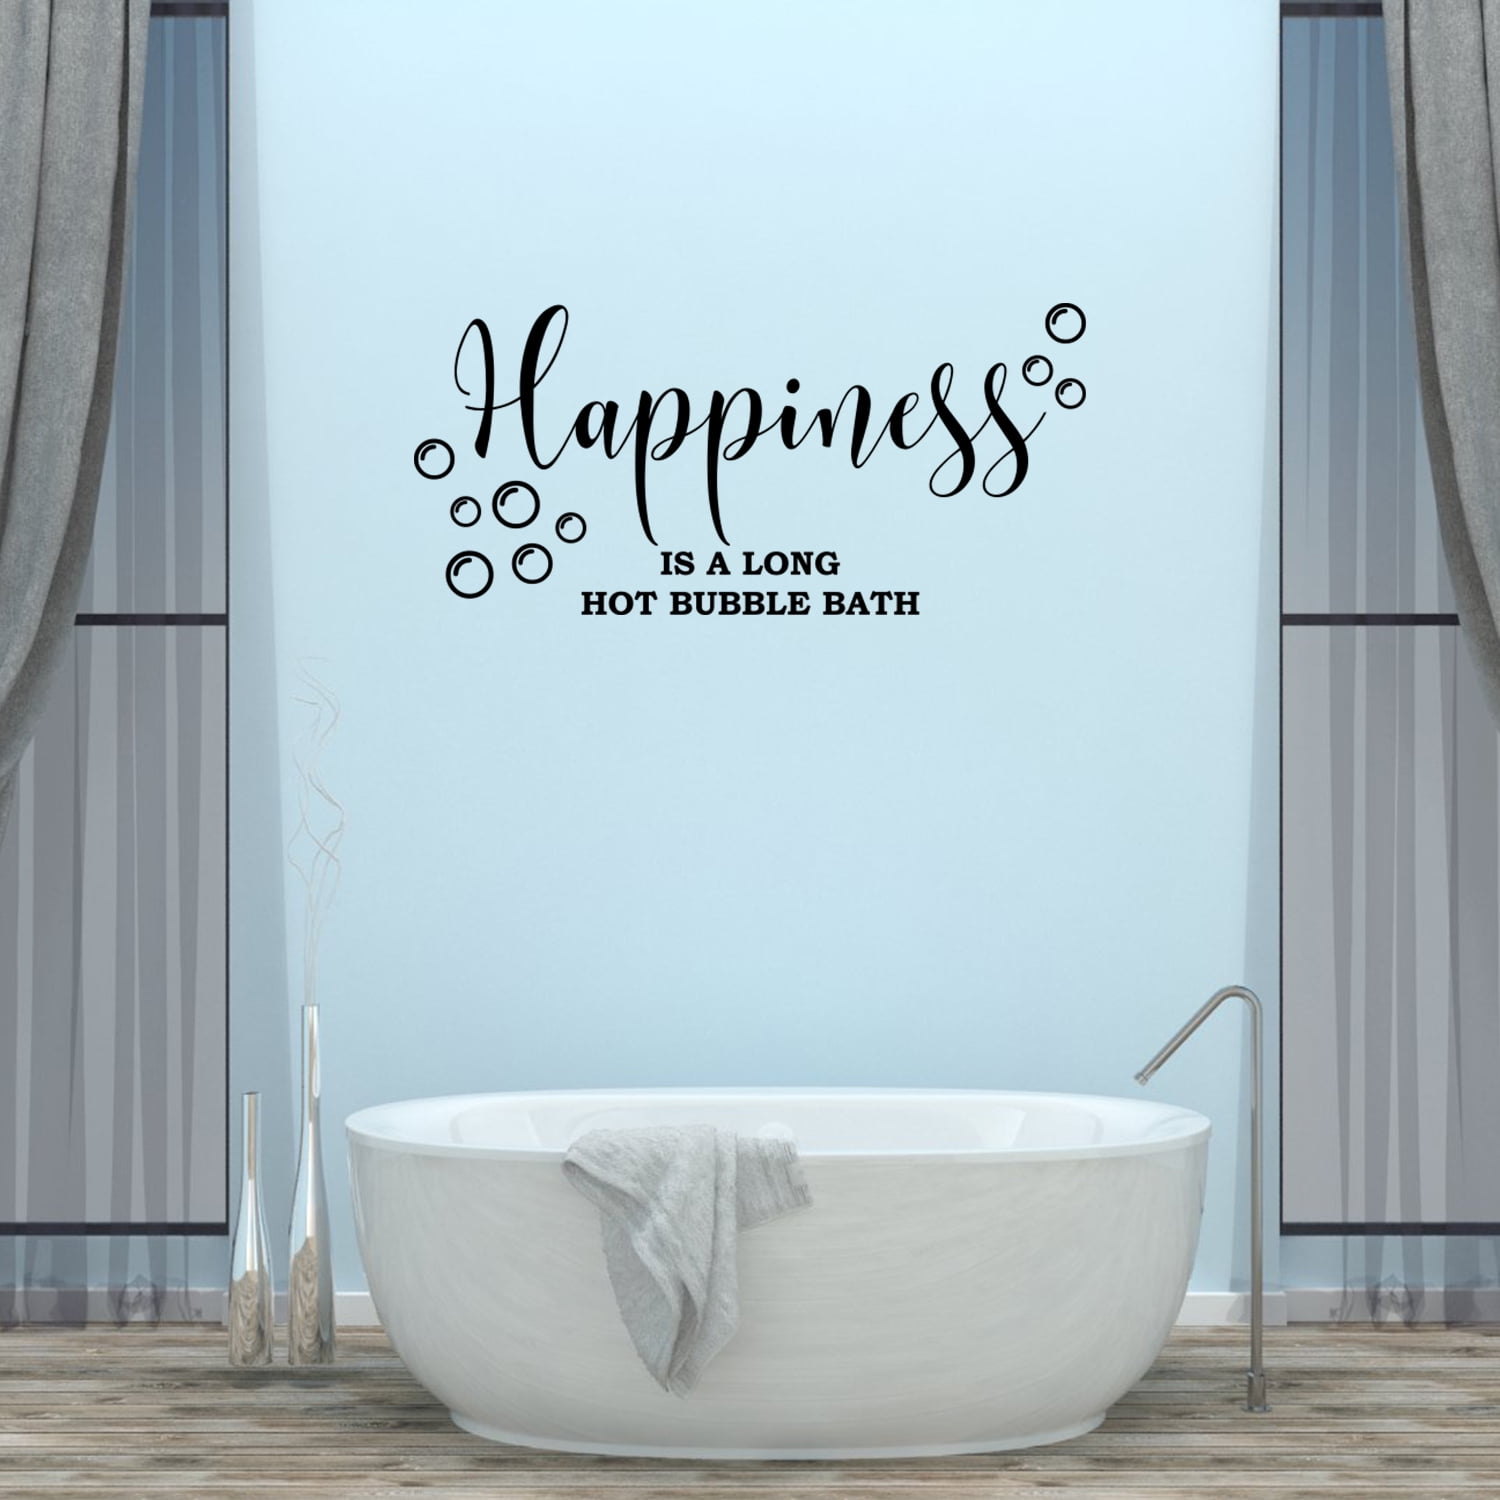 Happiness is a Long Hot Bubble Bath Bathroom Wall Decal Vinyl Sticker Quote BA06 